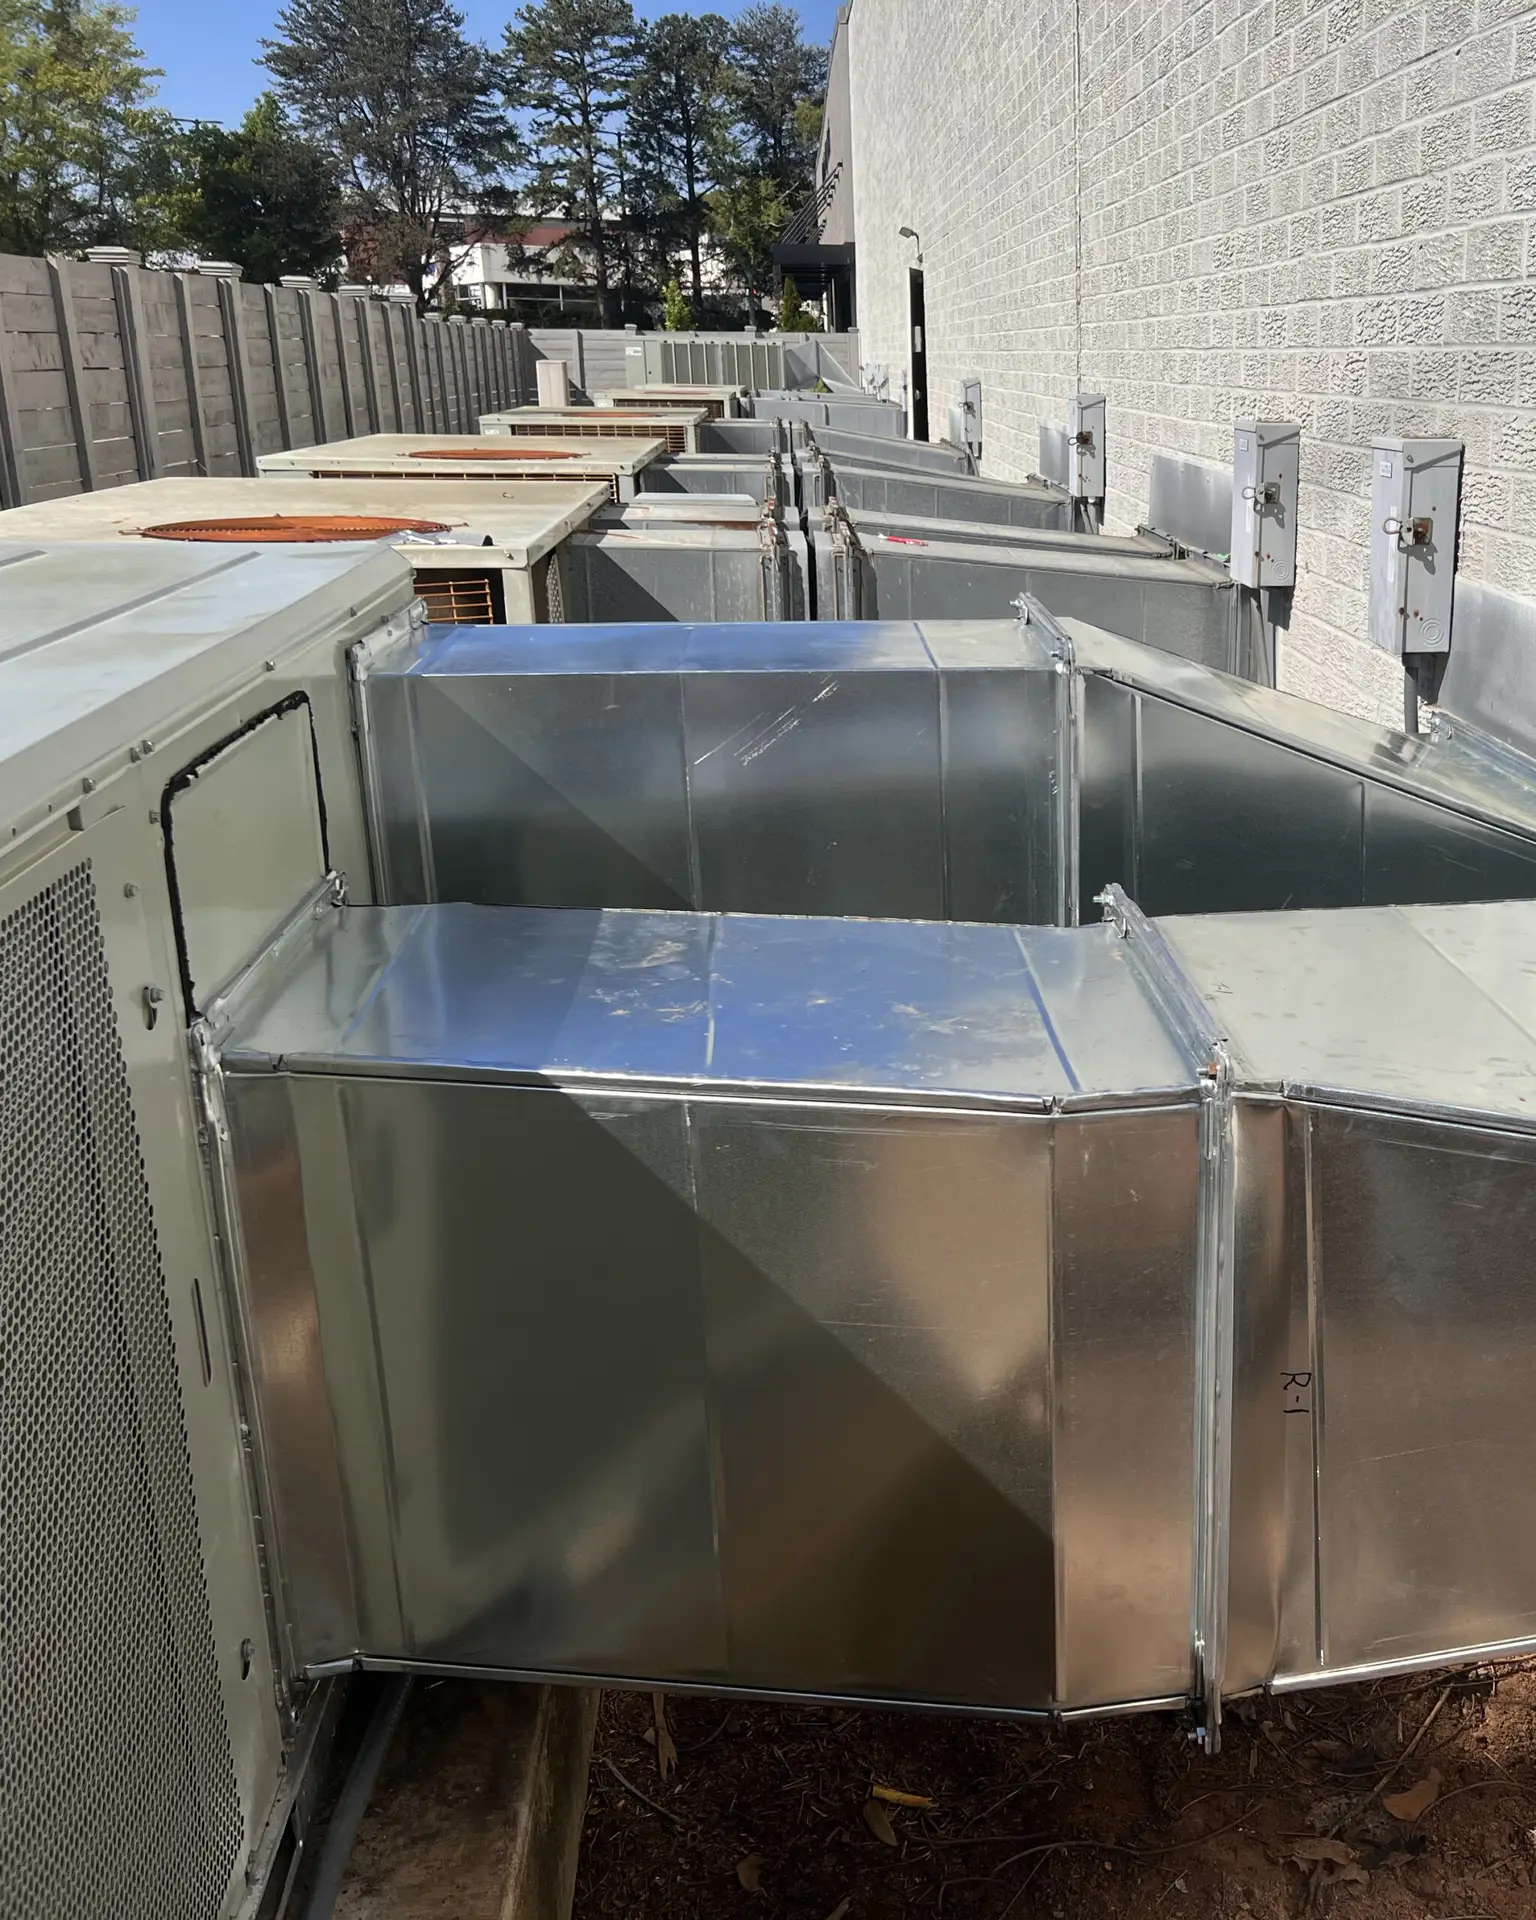 Ductwork on a commercial property outside - multiple units lined up